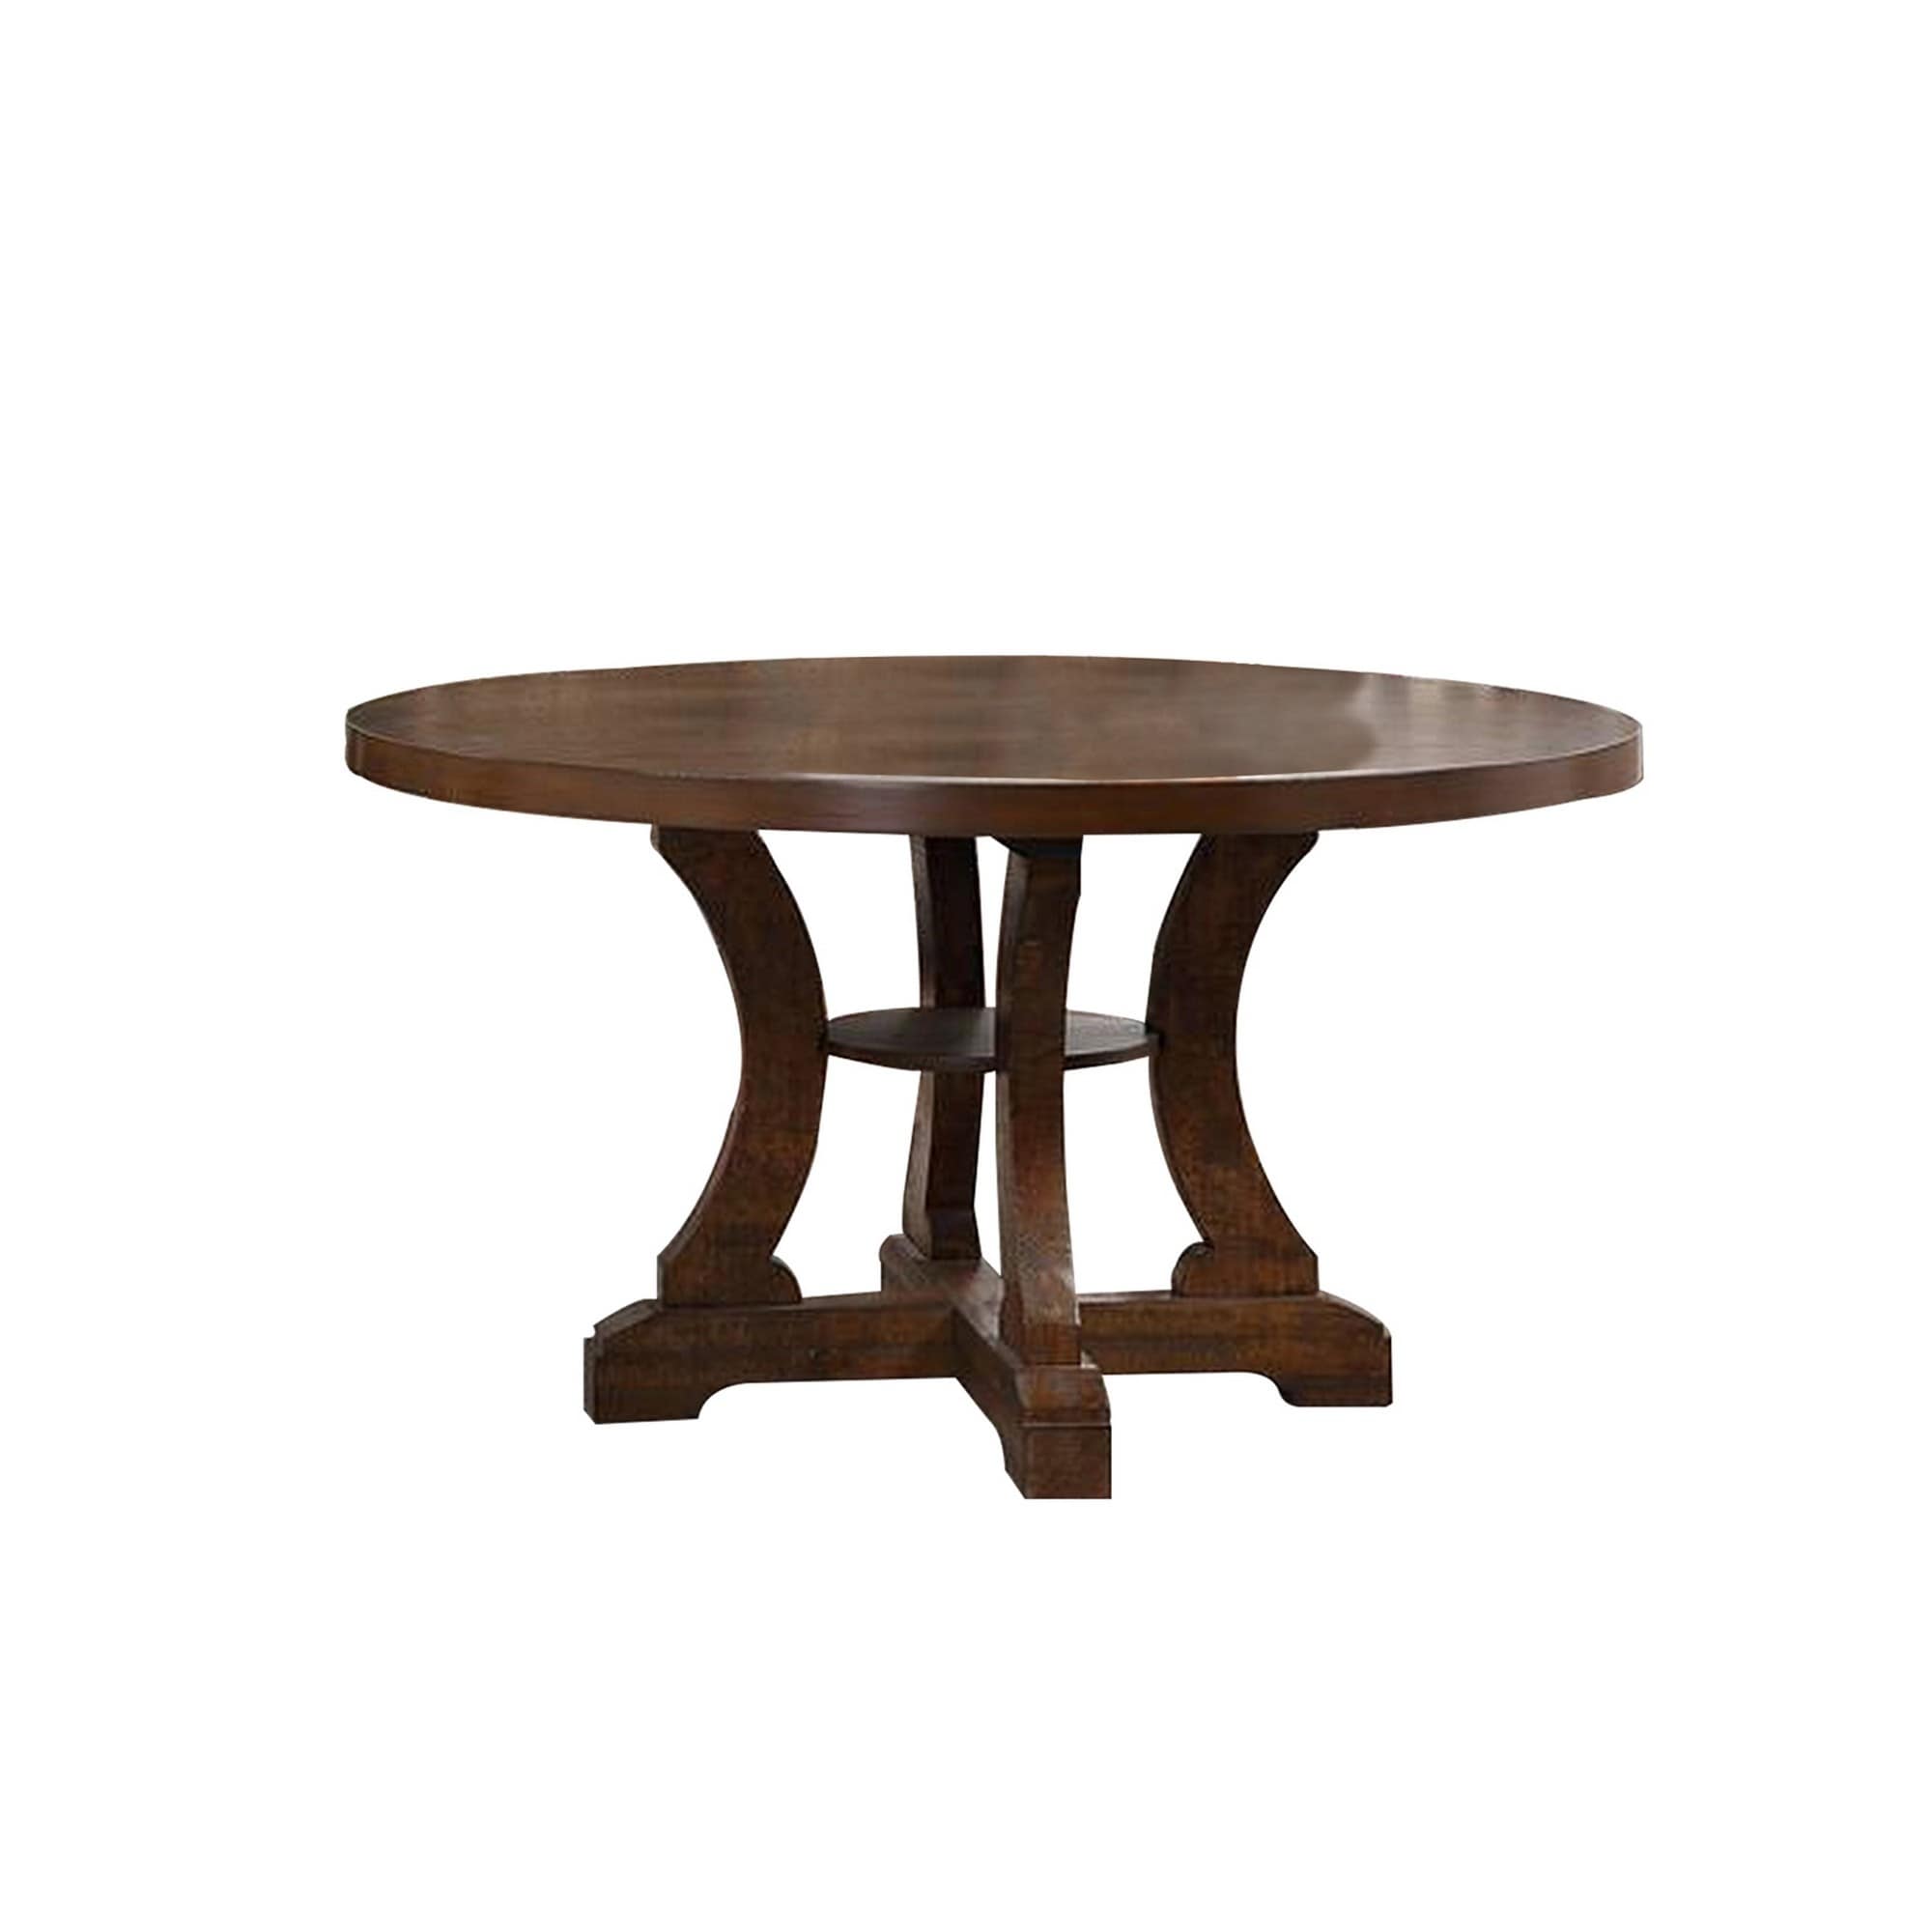 Neci 54 Inch Round Dining Table, Classic Pedestal, Painted Distressed Brown